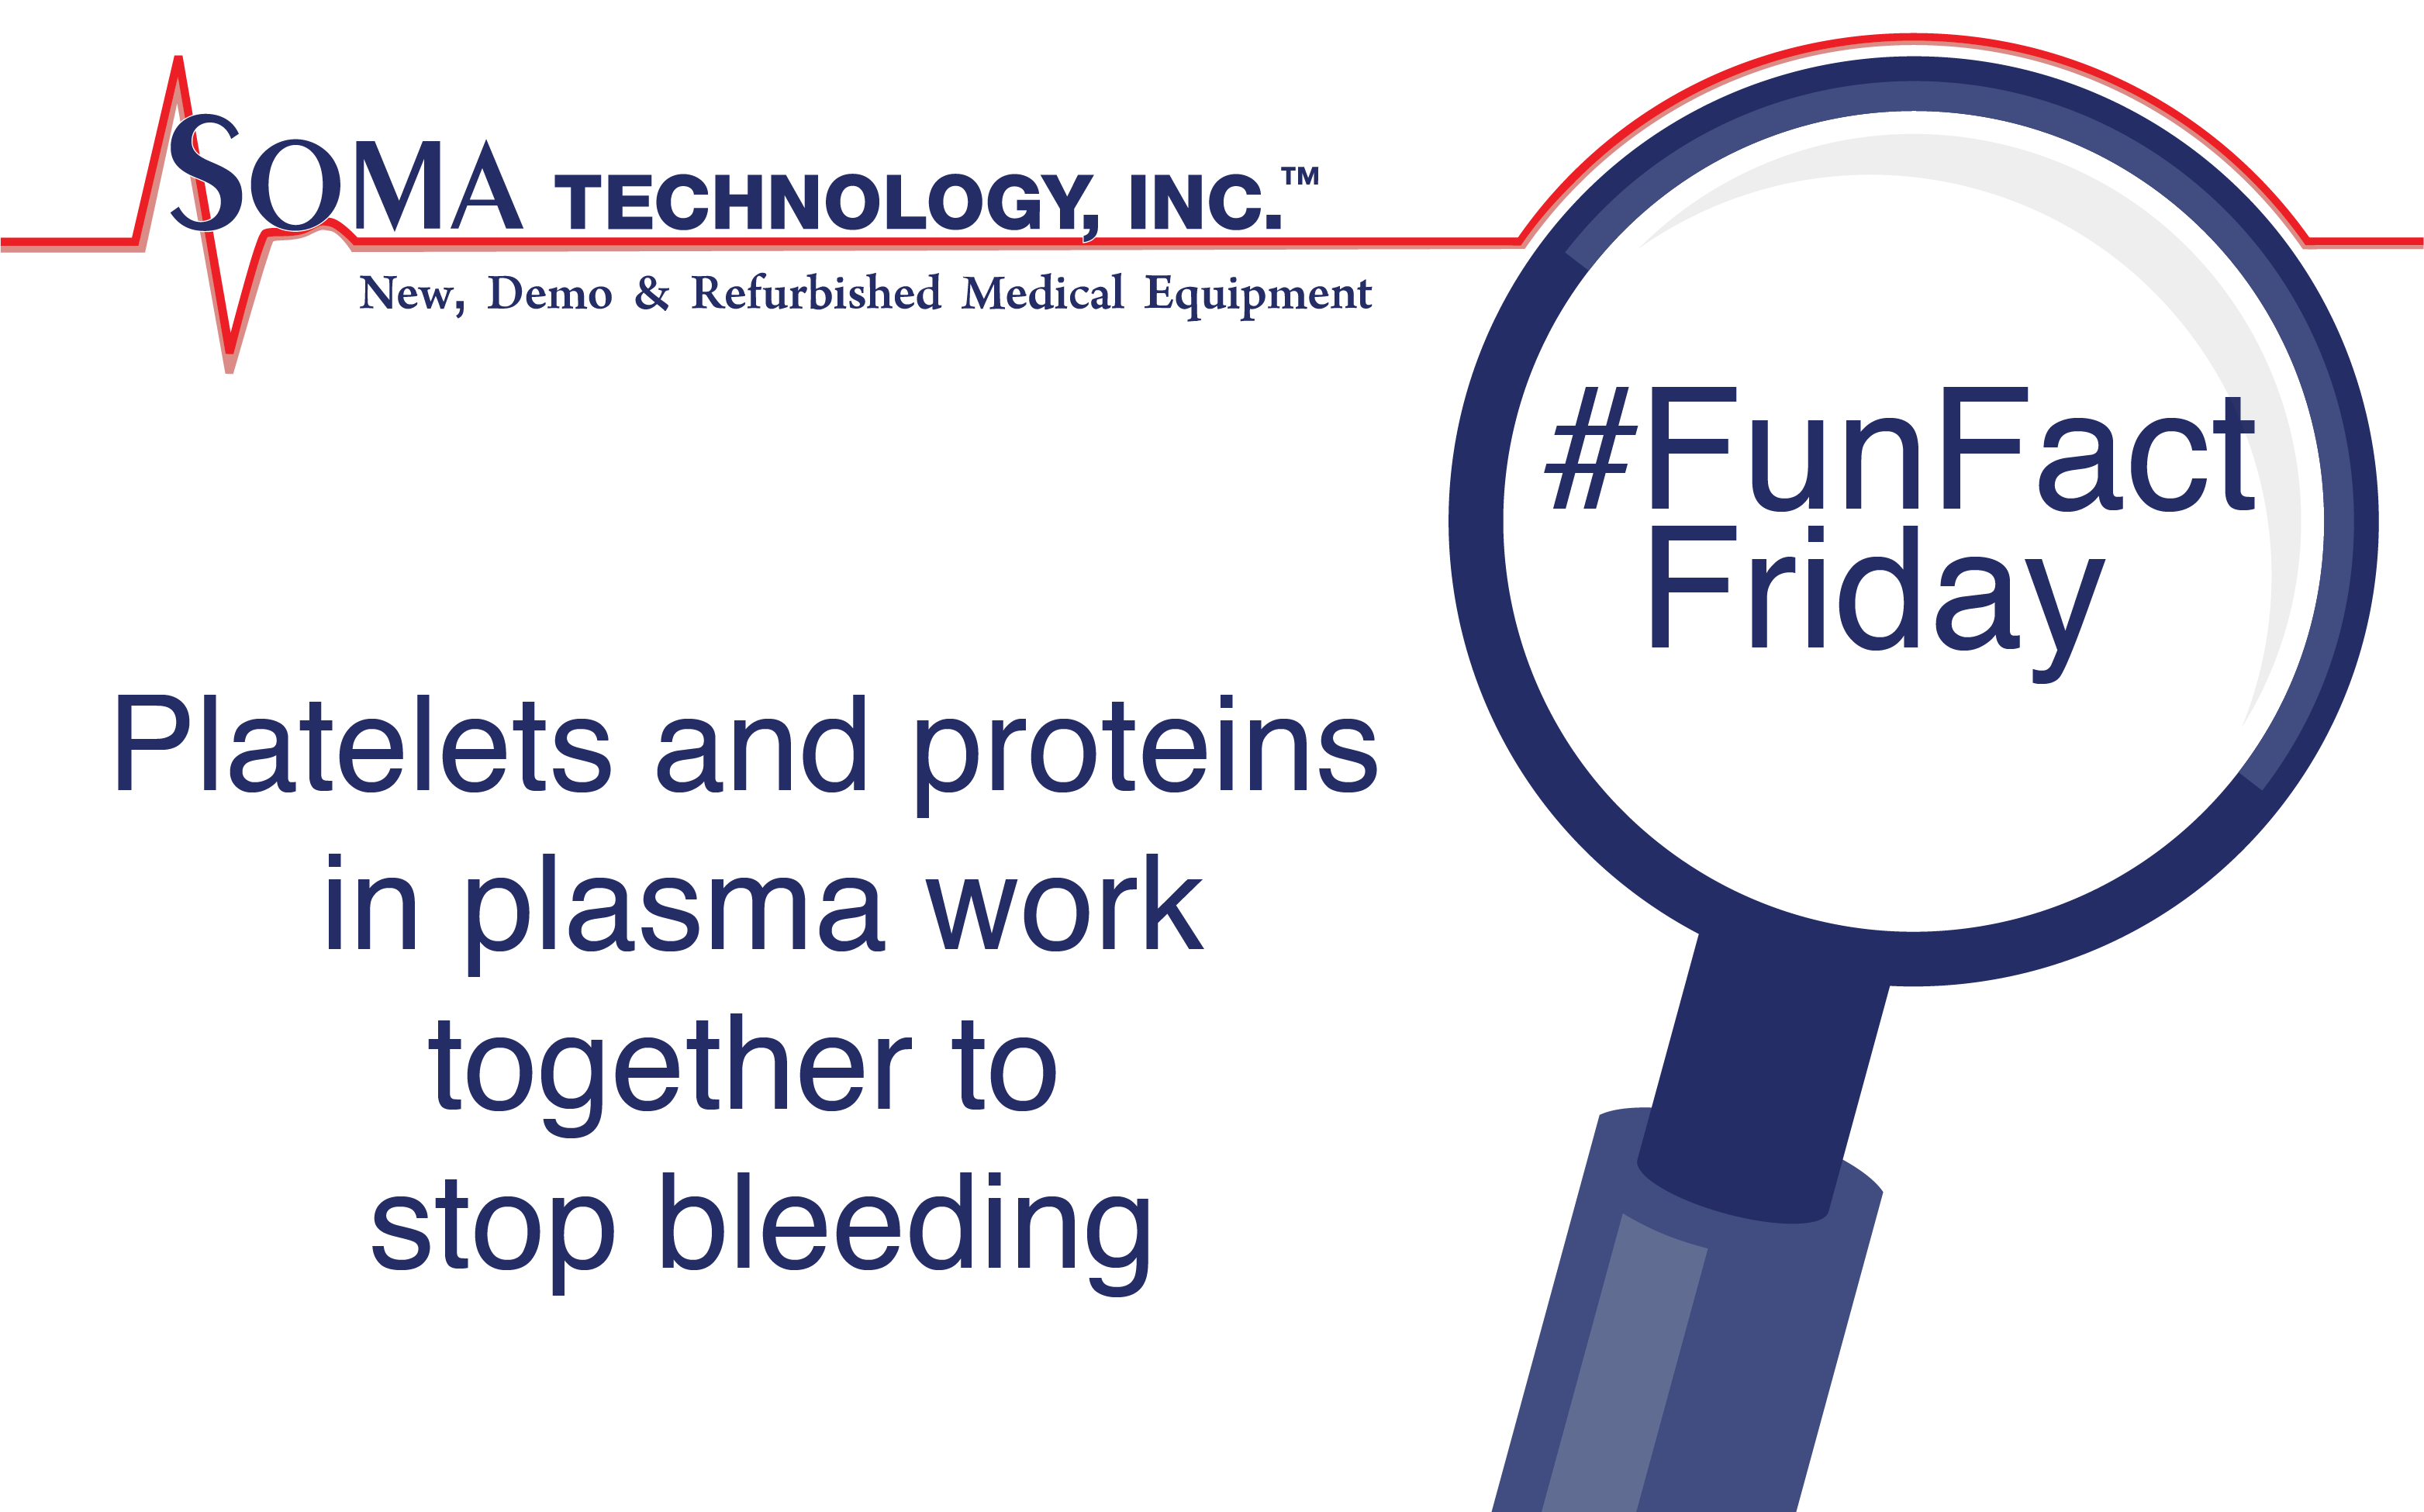 Platelets and proteins in plasma work together to stop bleeding - Soma Technology, Inc.